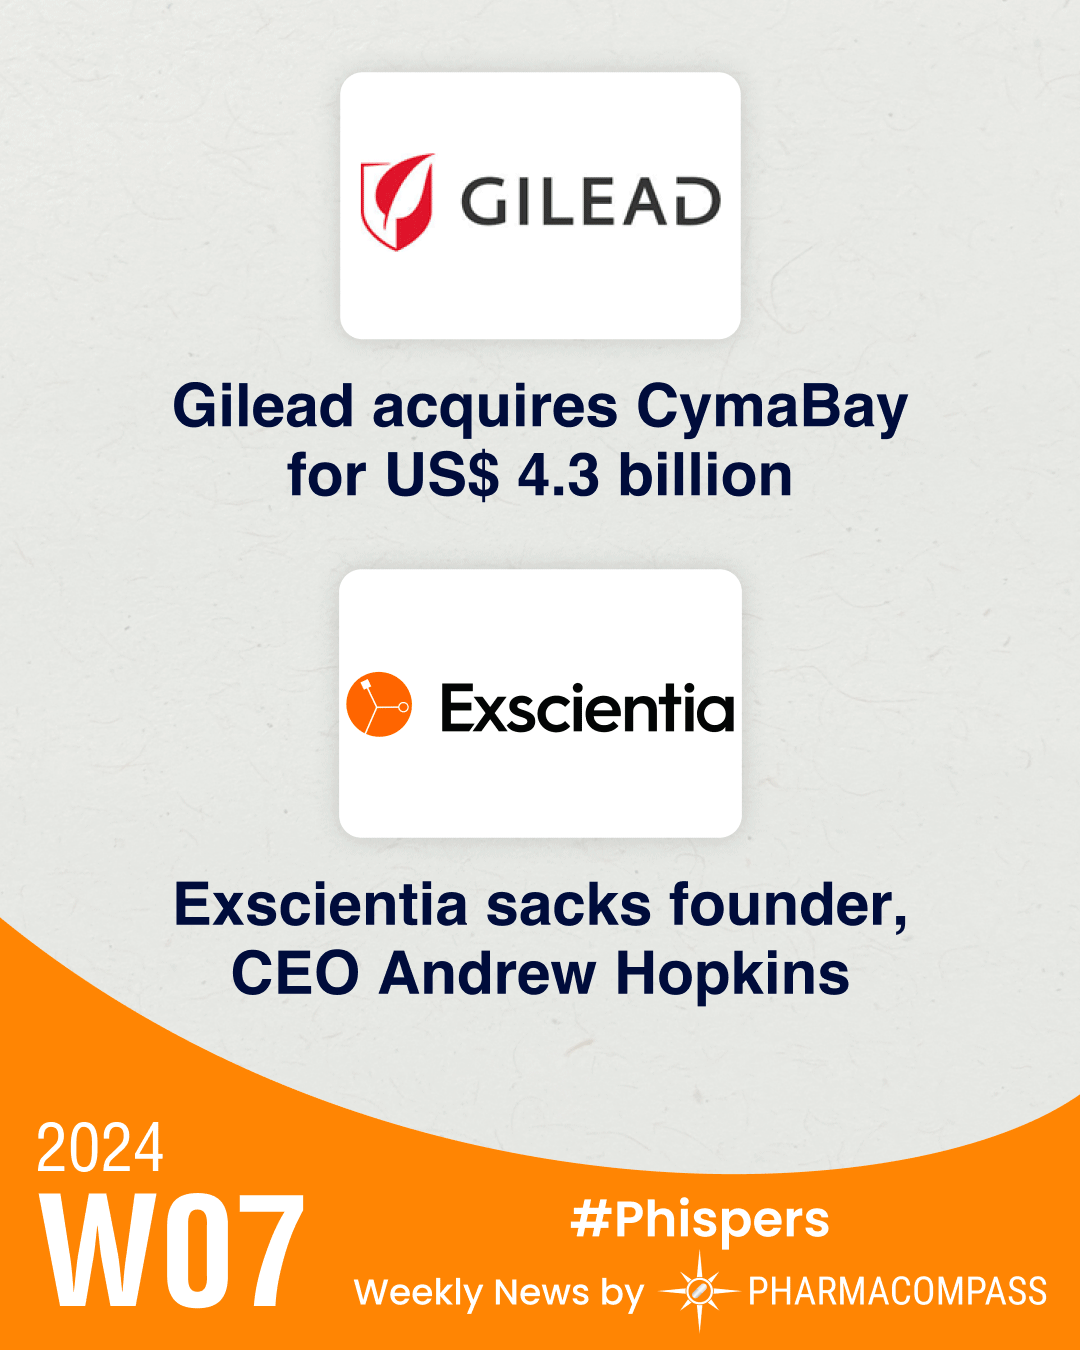 Gilead acquires CymaBay for US$ 4.3 billion; Exscientia sacks founder CEO Andrew Hopkins